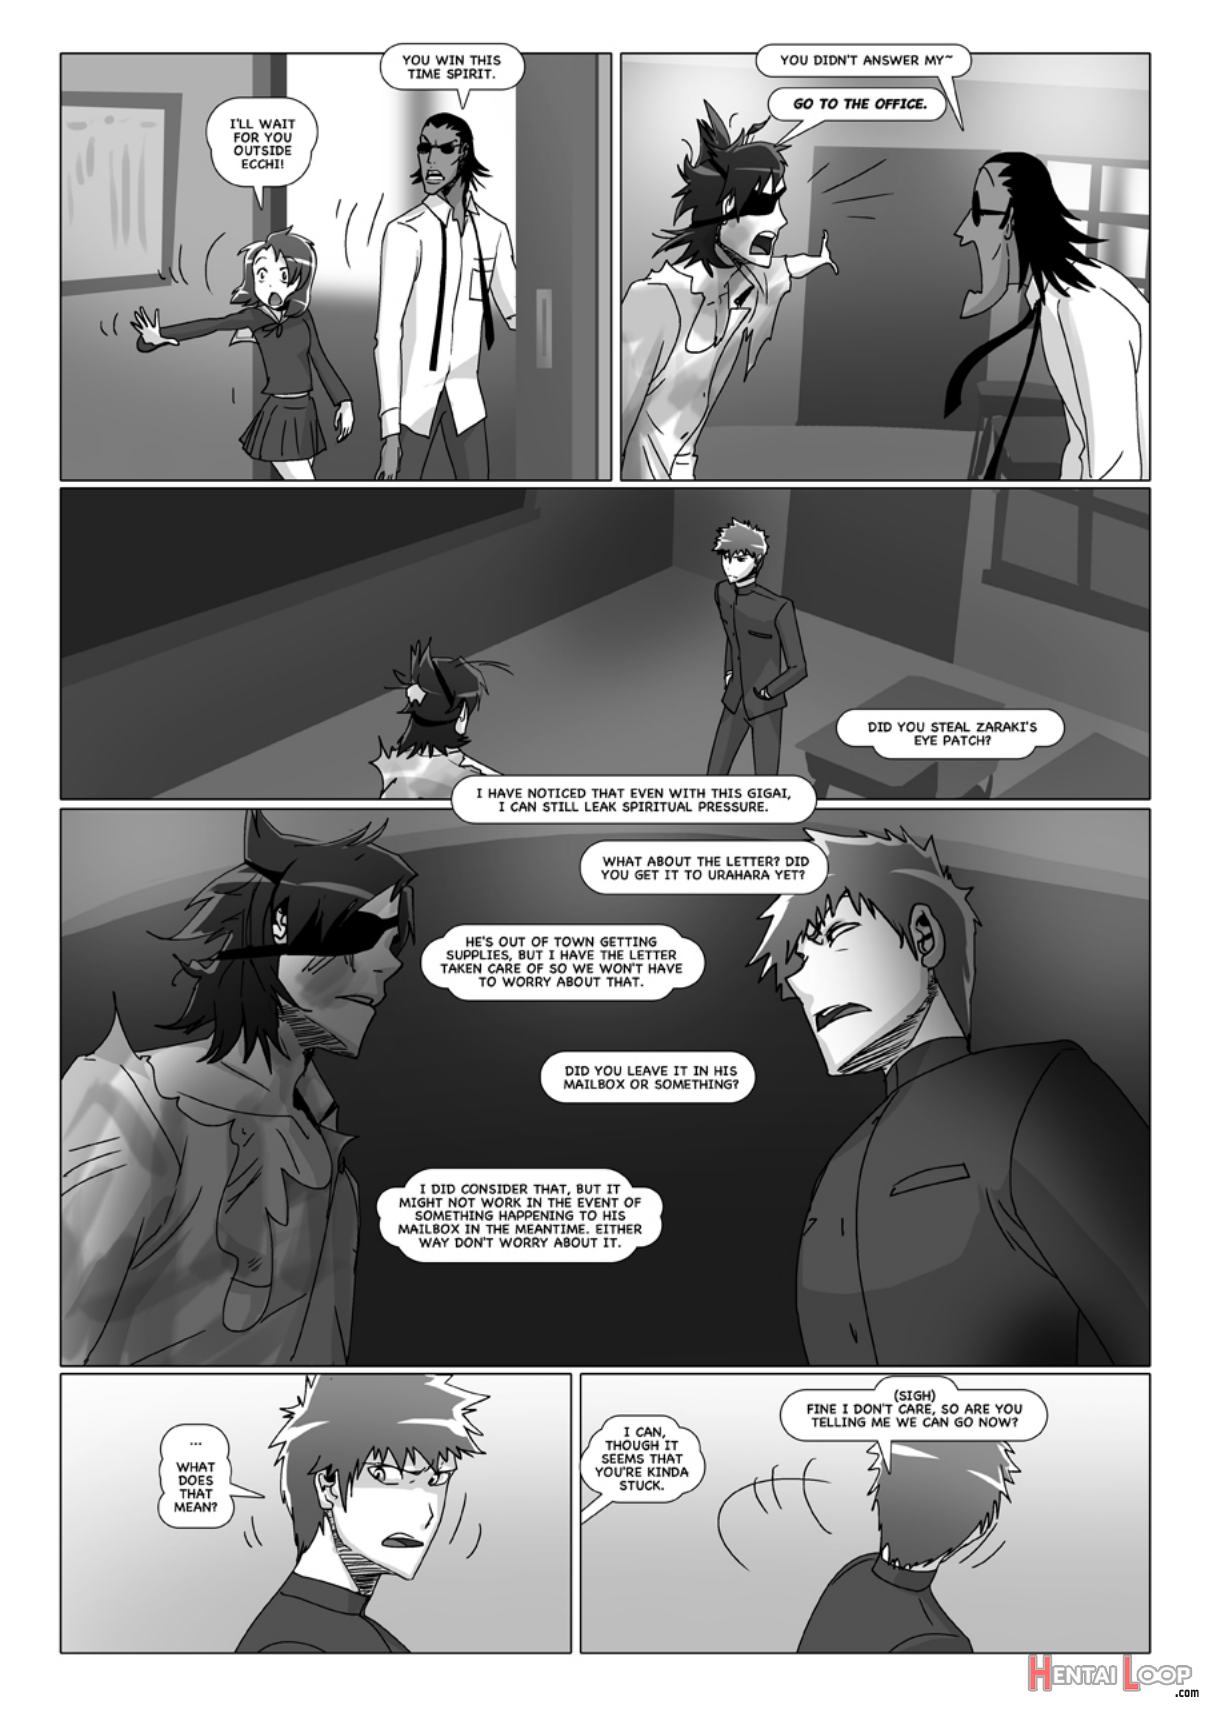 Happy To Serve You - Xxx Version page 436